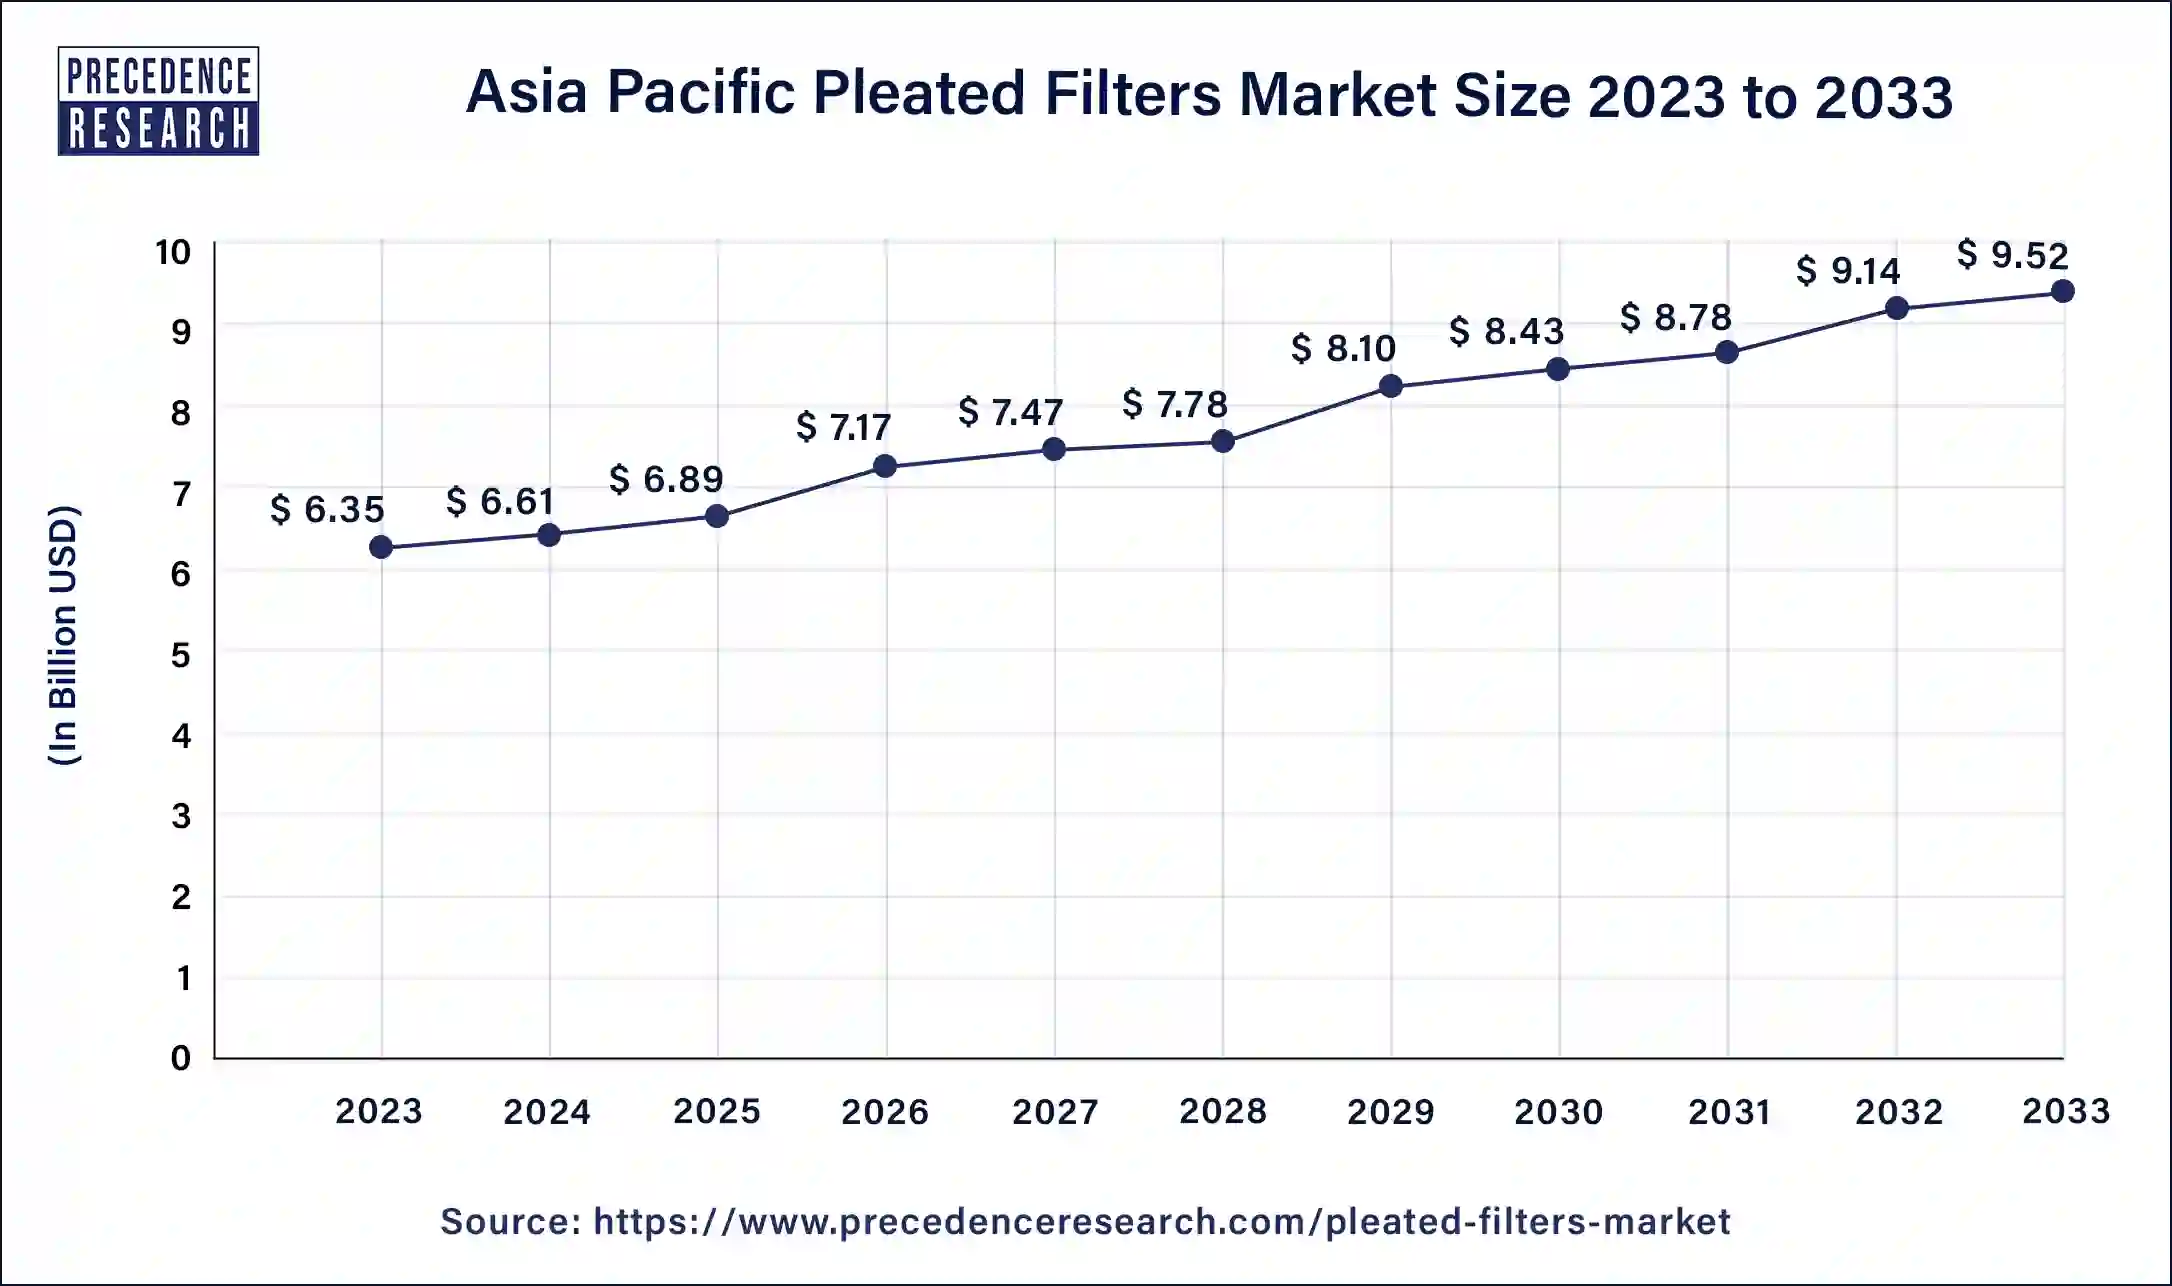 Asia Pacific Pleated Filters Market Size 2024 to 2033